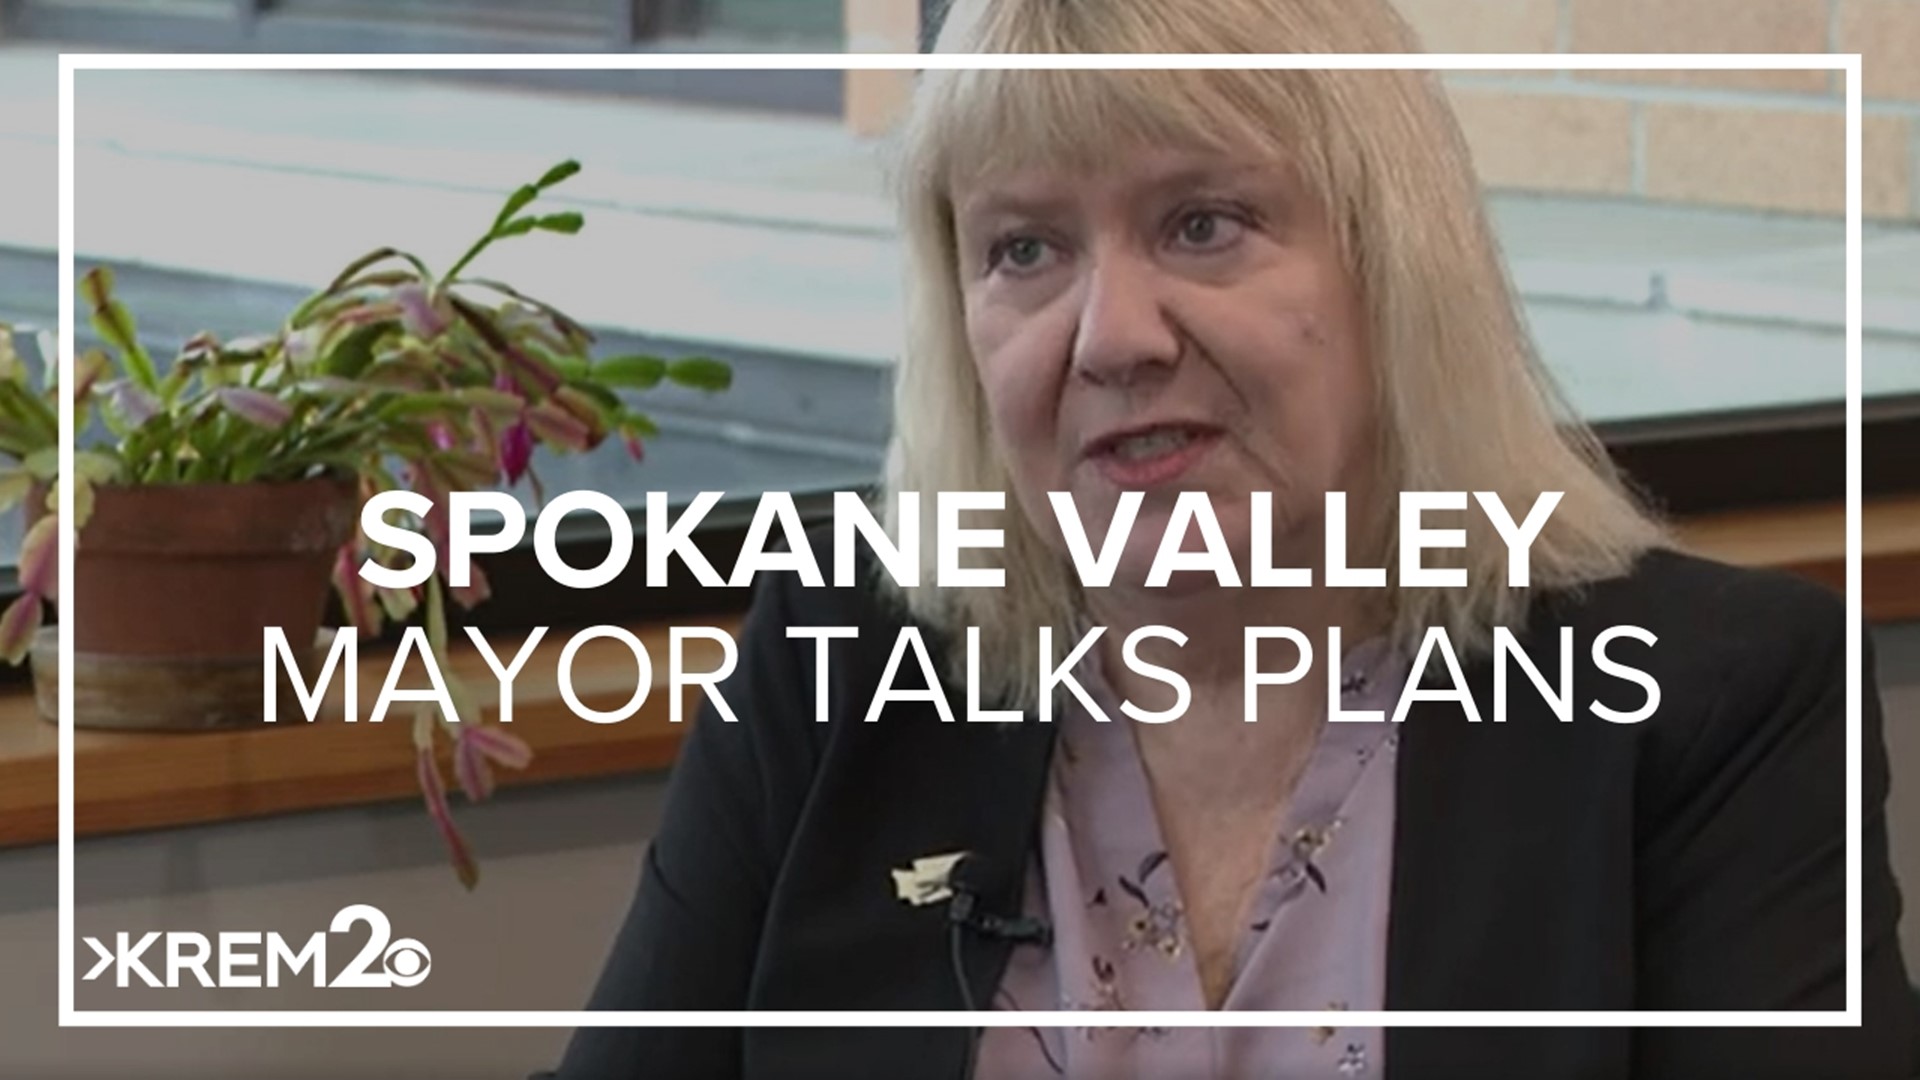 Spokane Valley Mayor Pamela Haley sat down with KREM 2 to share her top priorities for her term, including reducing crime and tackling homelessness.